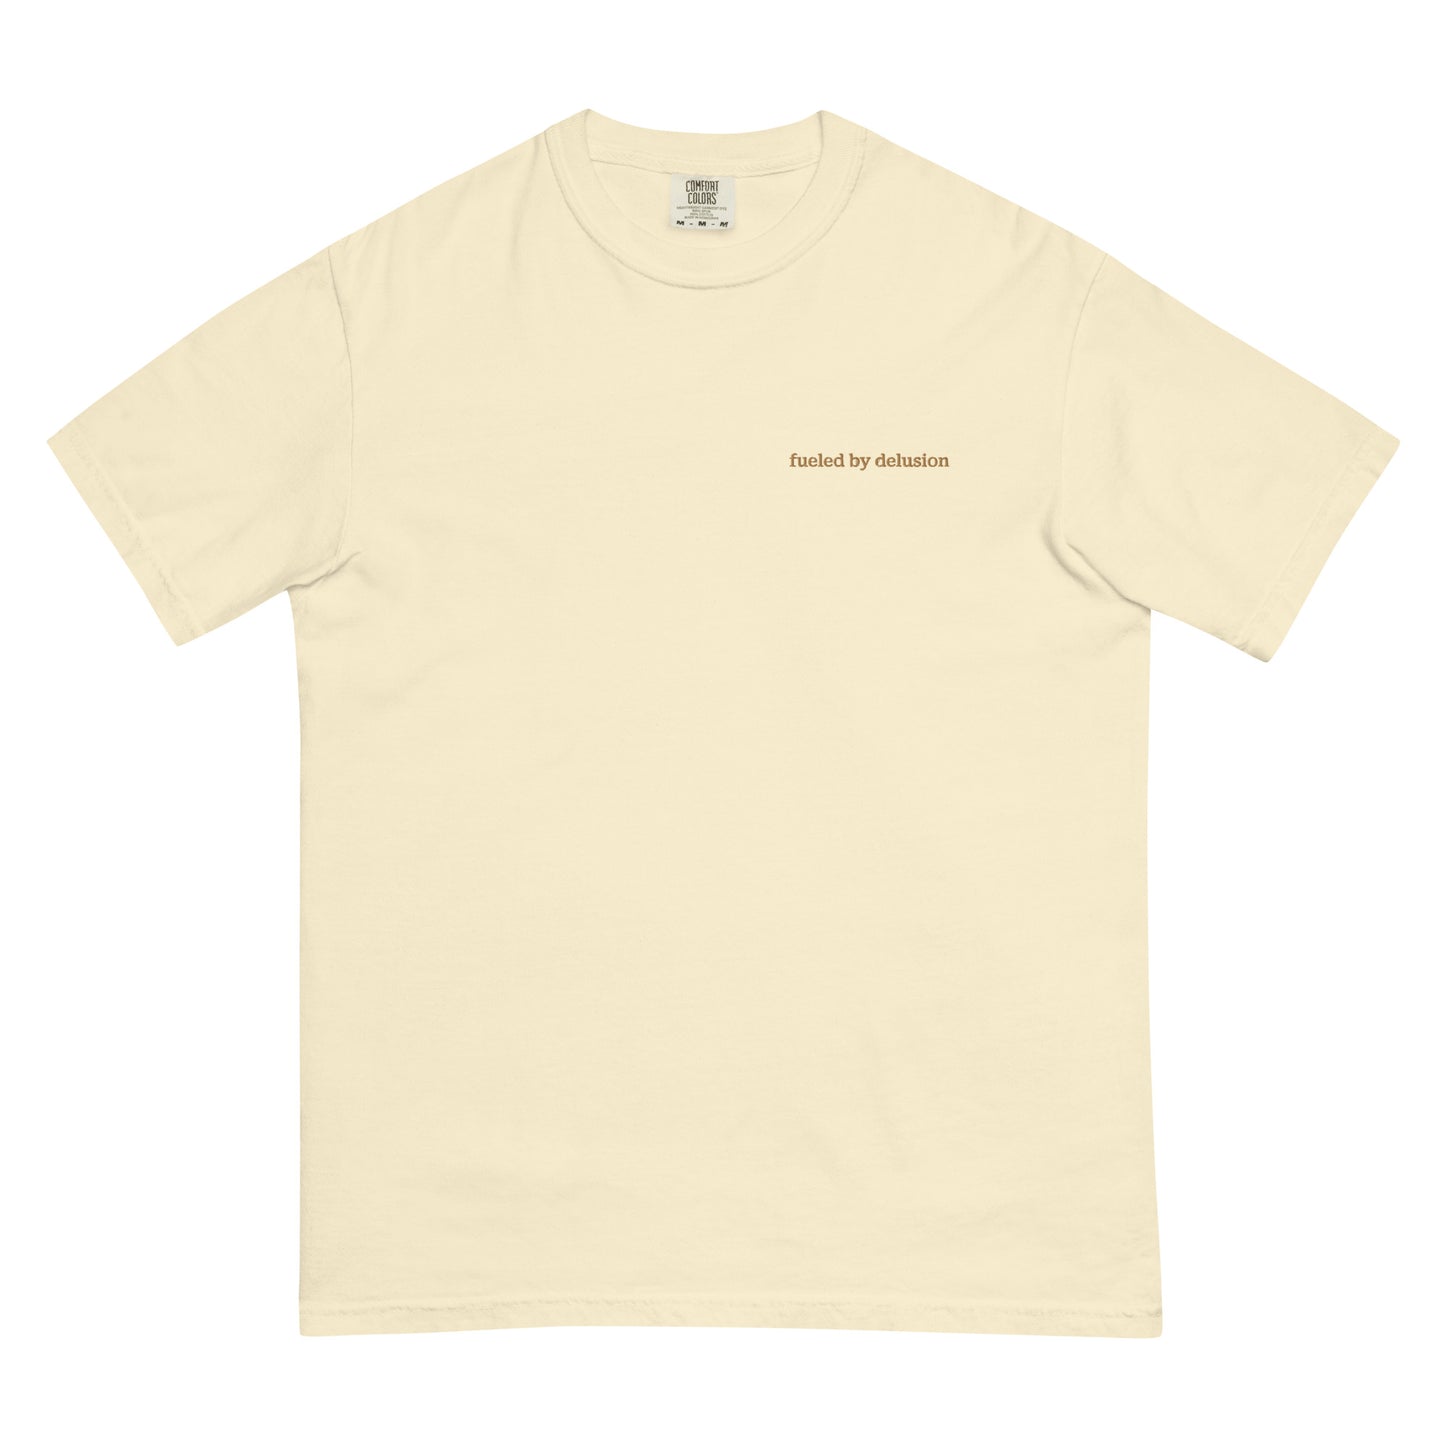 fueled by delusion plain tee